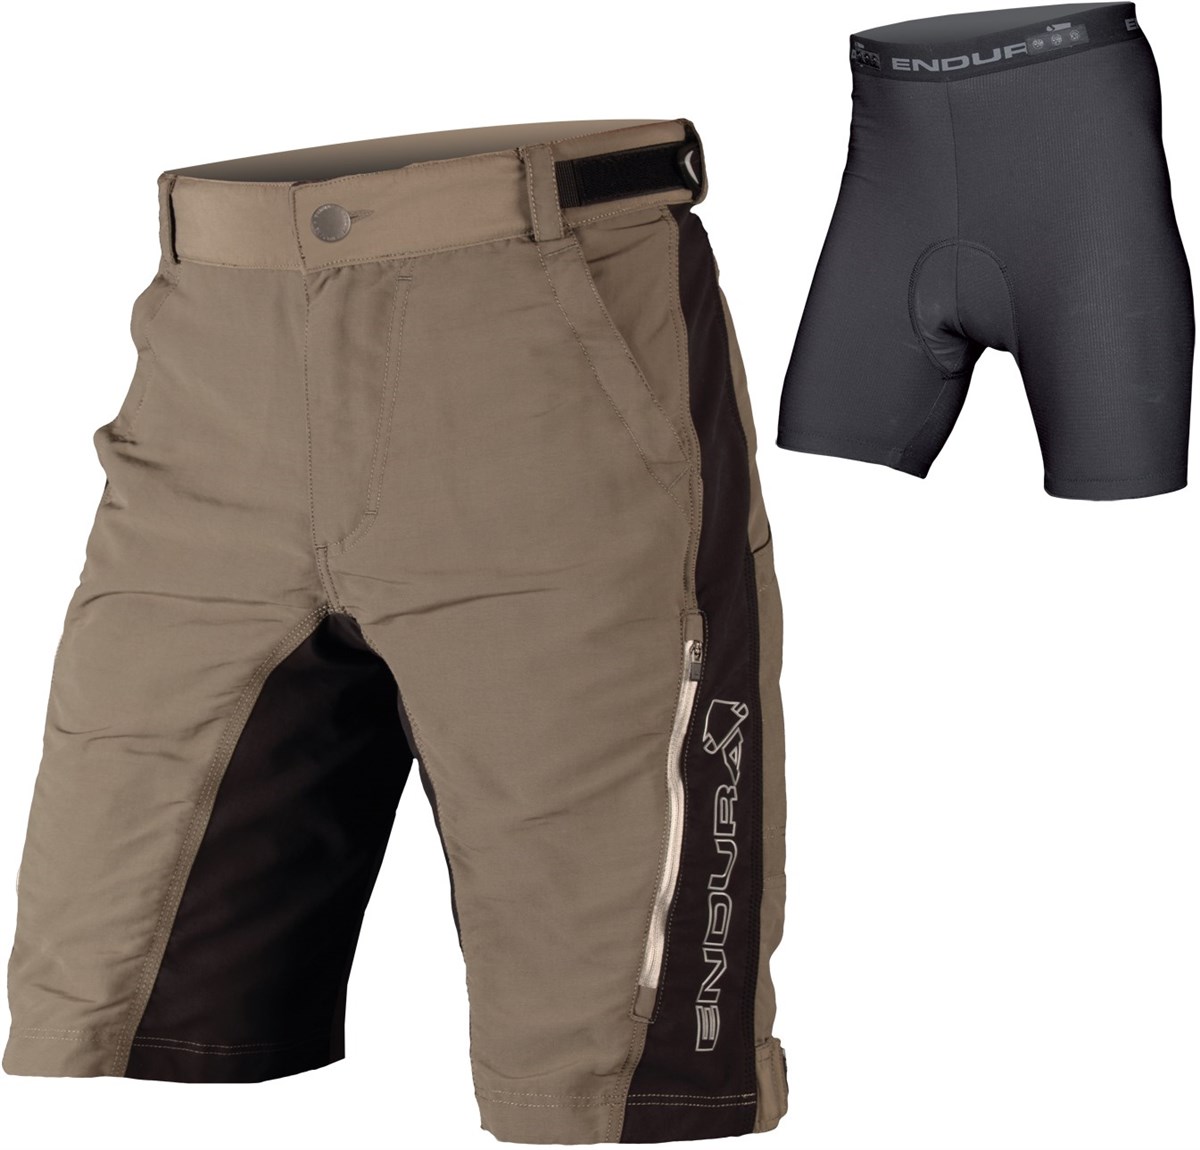 Endura SingleTrack II Baggy Cycling Shorts With Liner Shorts SS16 product image